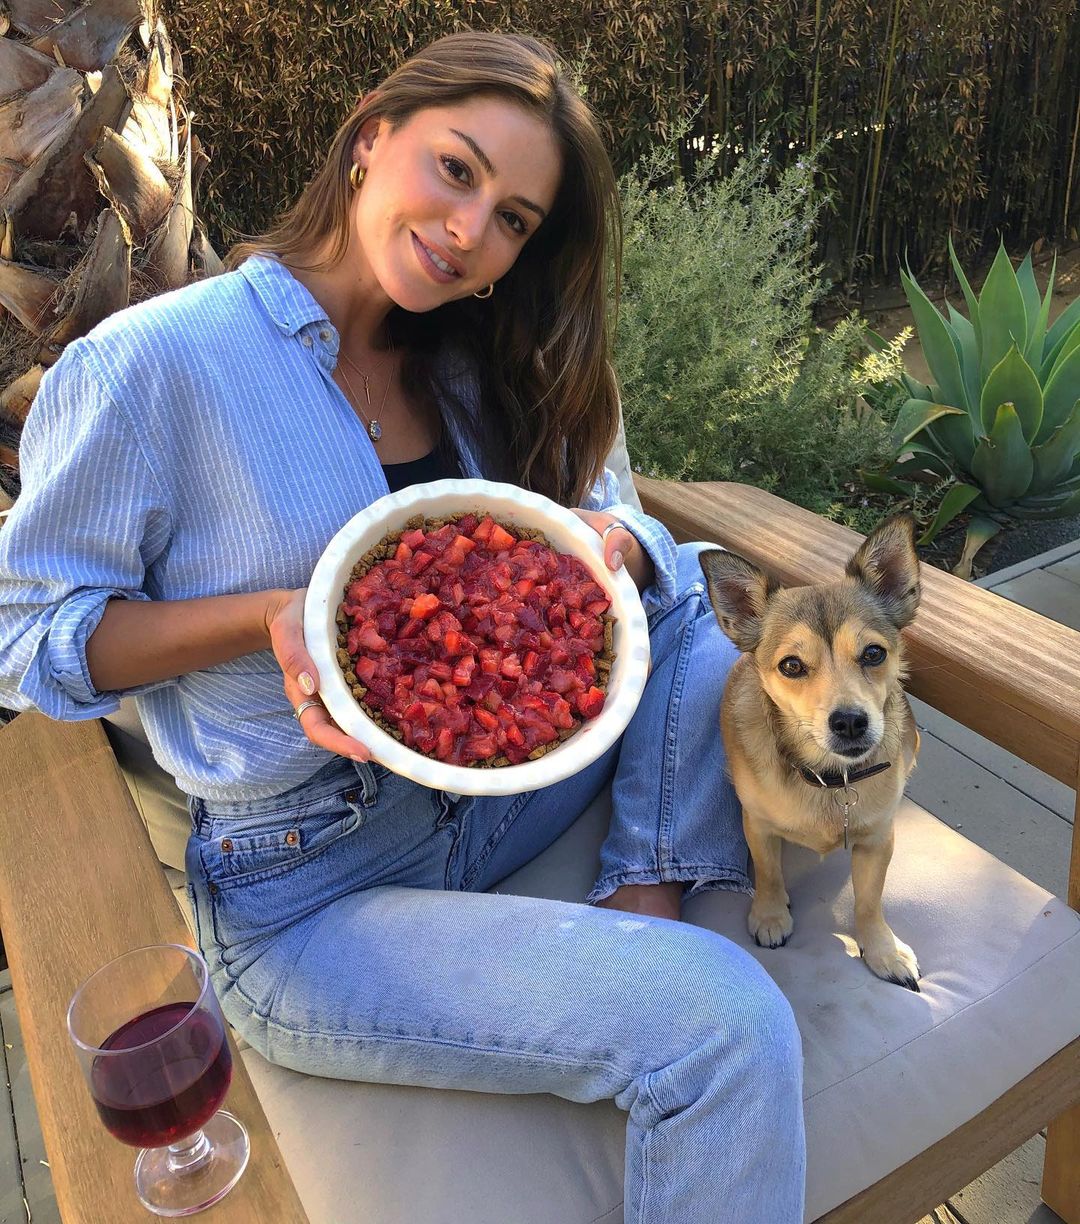 Pictures of Jehane Marie and her lovely pet